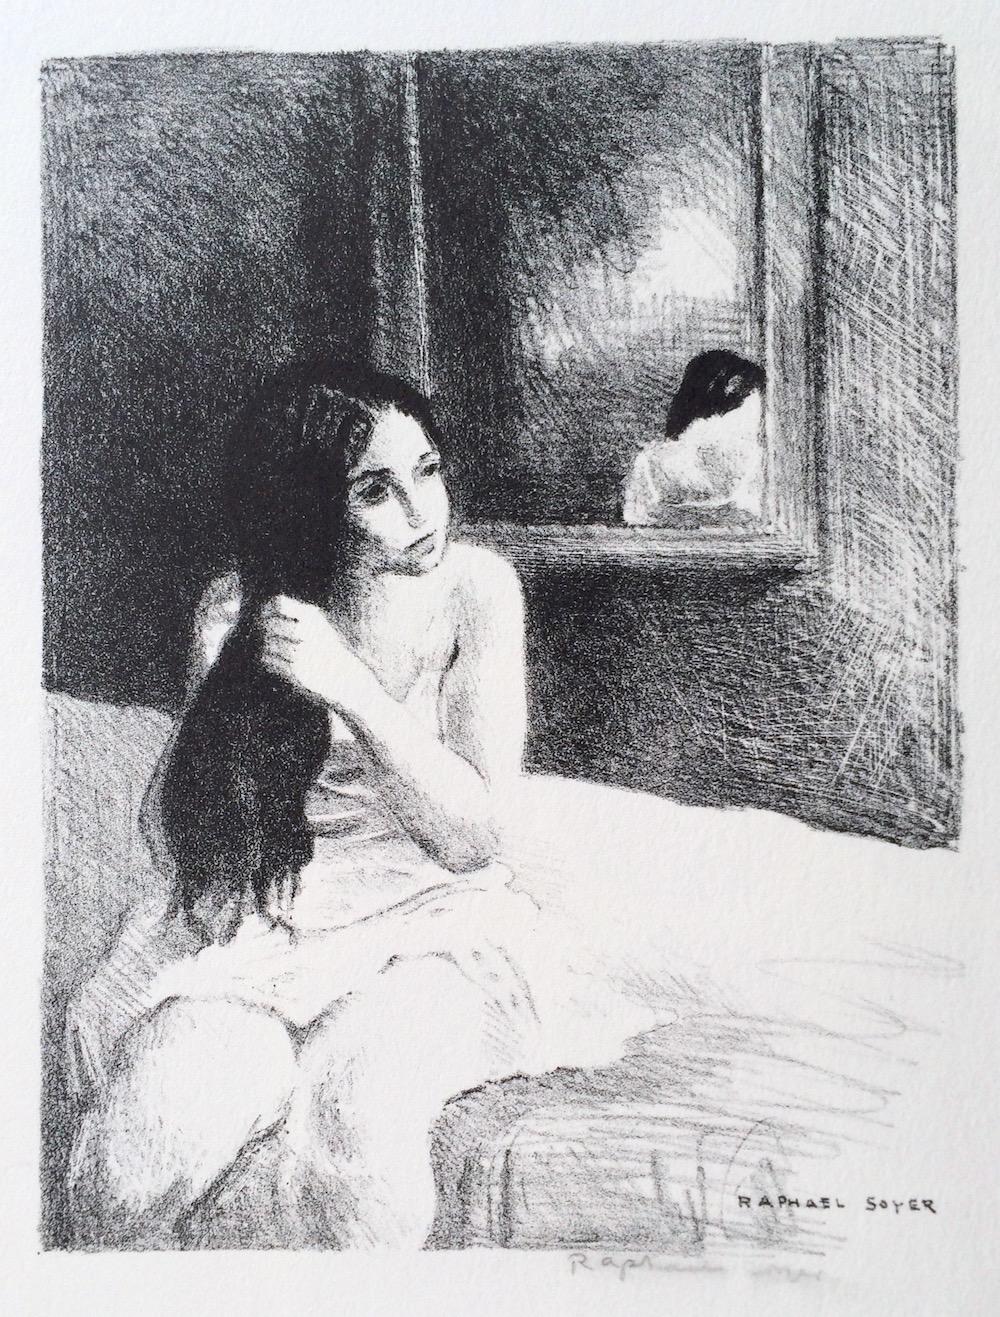 Raphael Soyer Interior Print - YOUNG WOMAN COMBING HER HAIR Hand Drawn Signed Lithograph, Interior Portrait